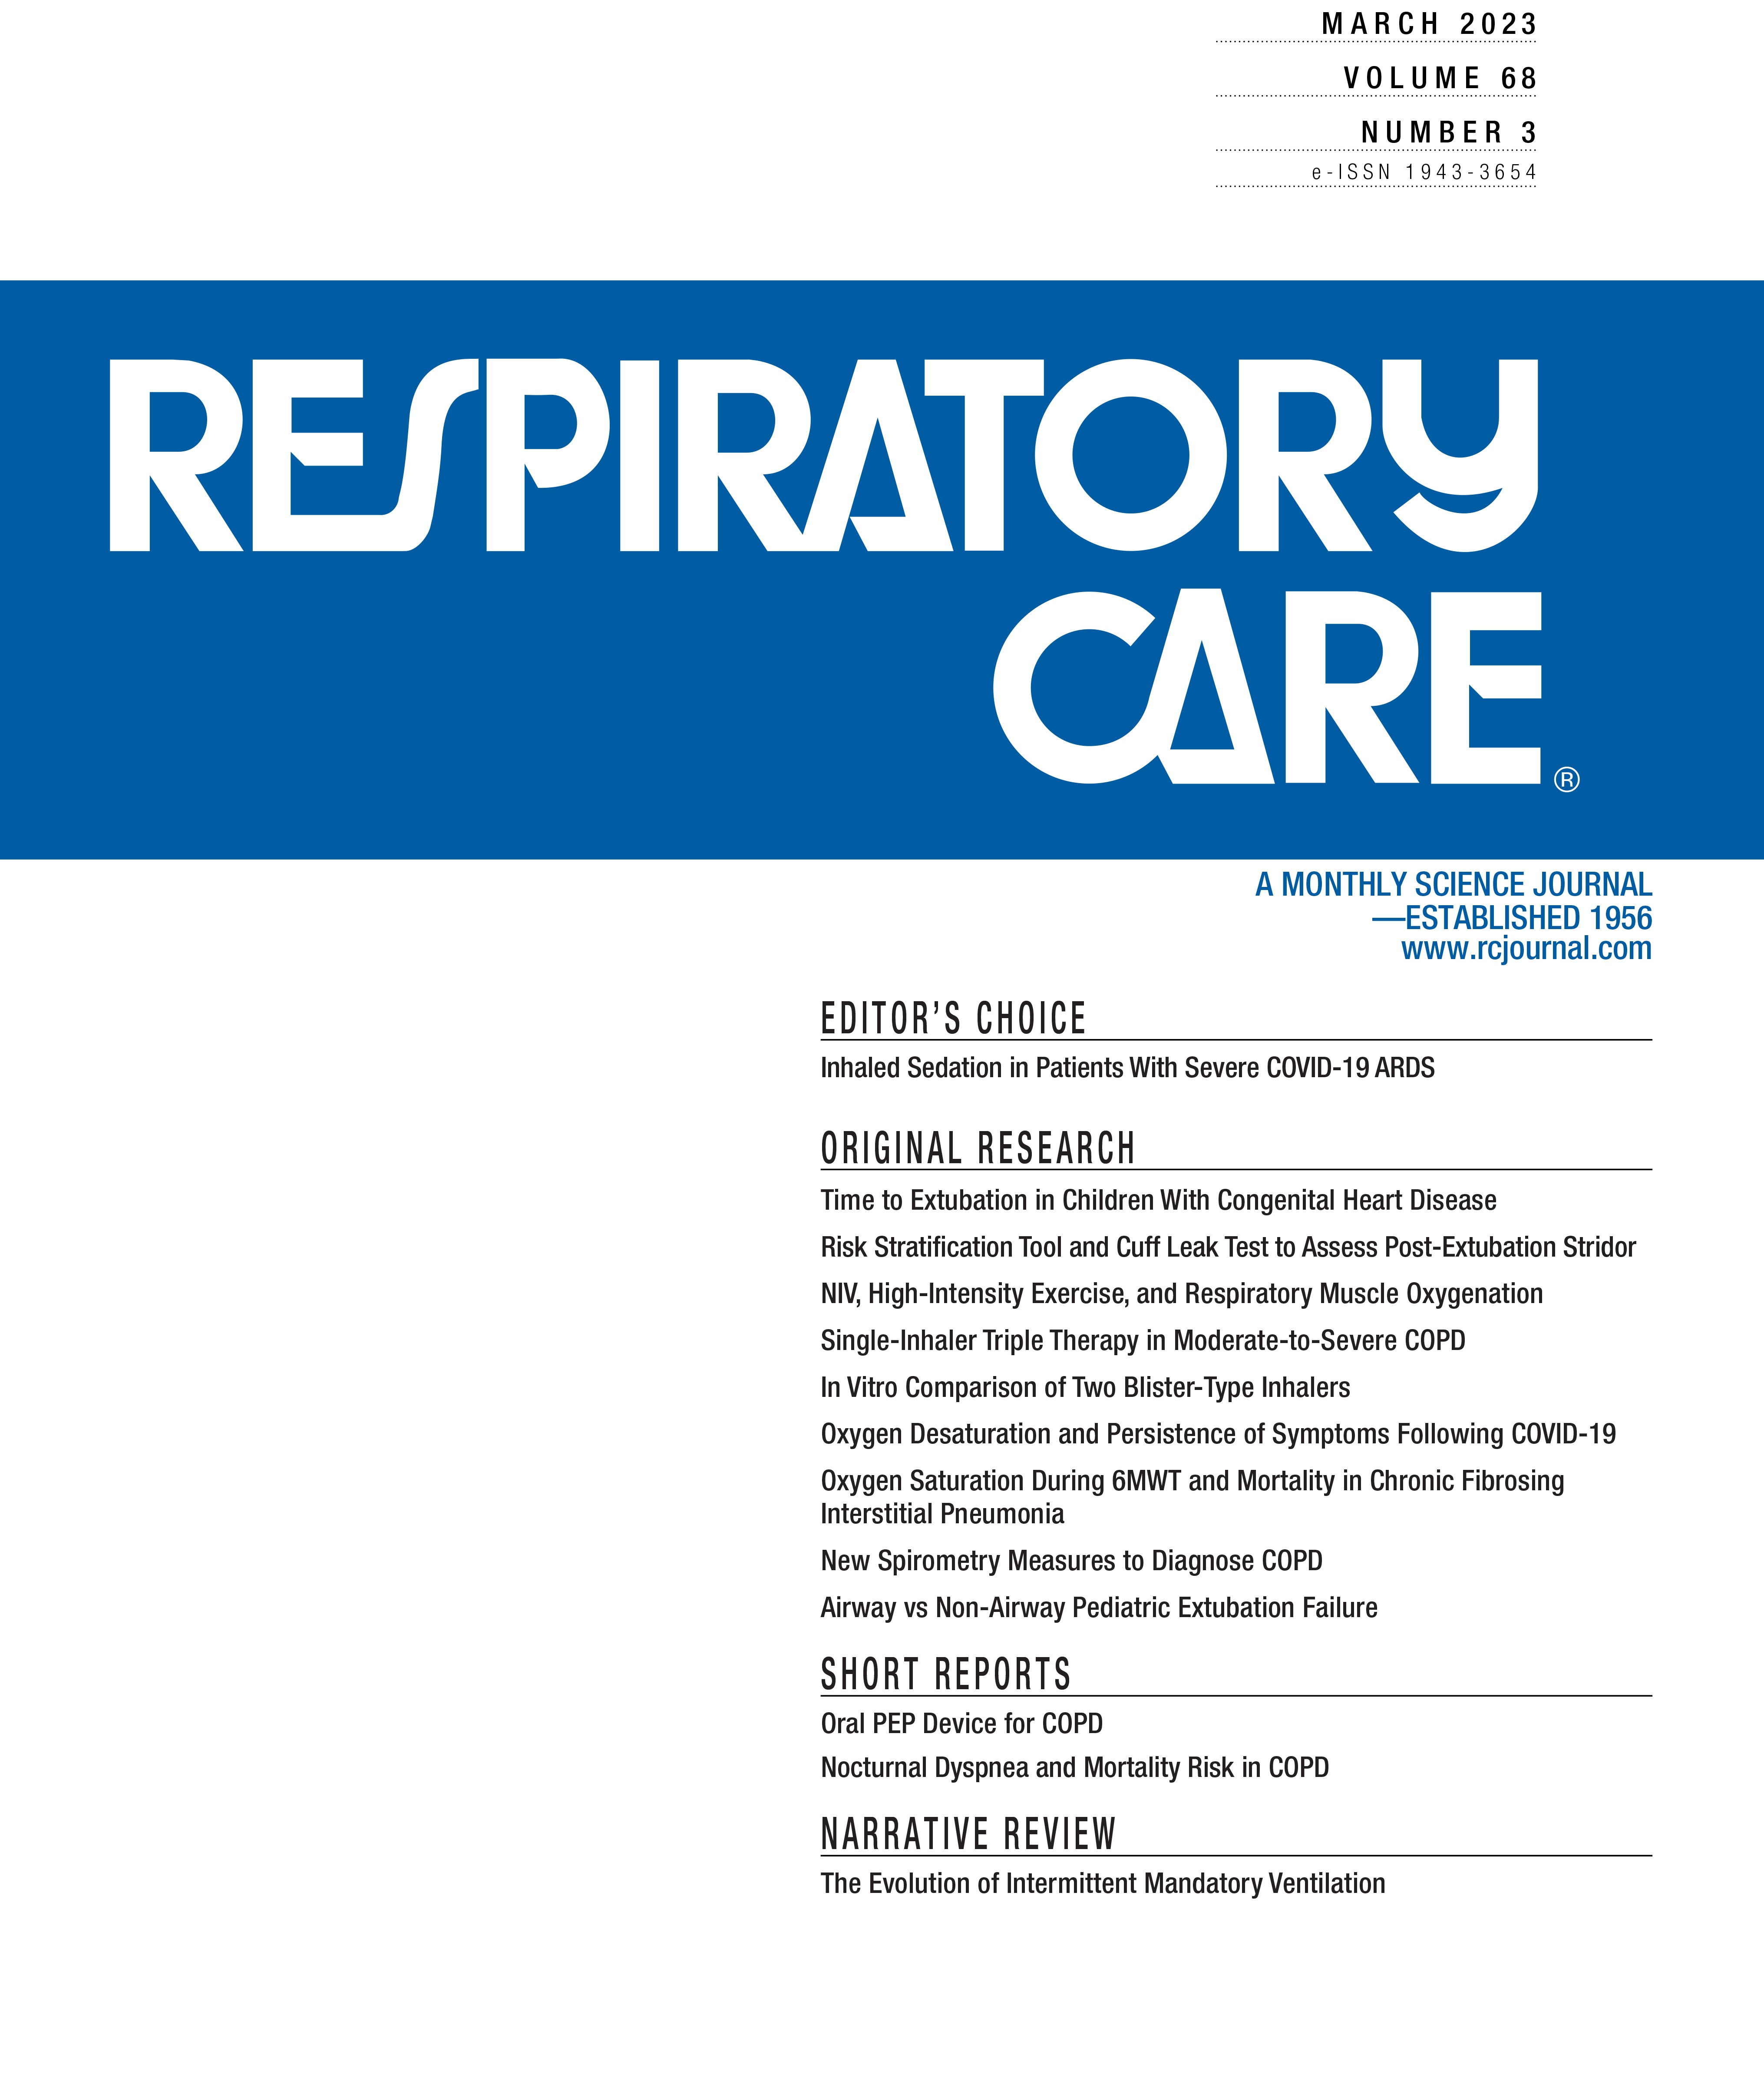 Therapeutic Response to Single-Inhaler Triple Therapies in Moderate-to-Severe COPD